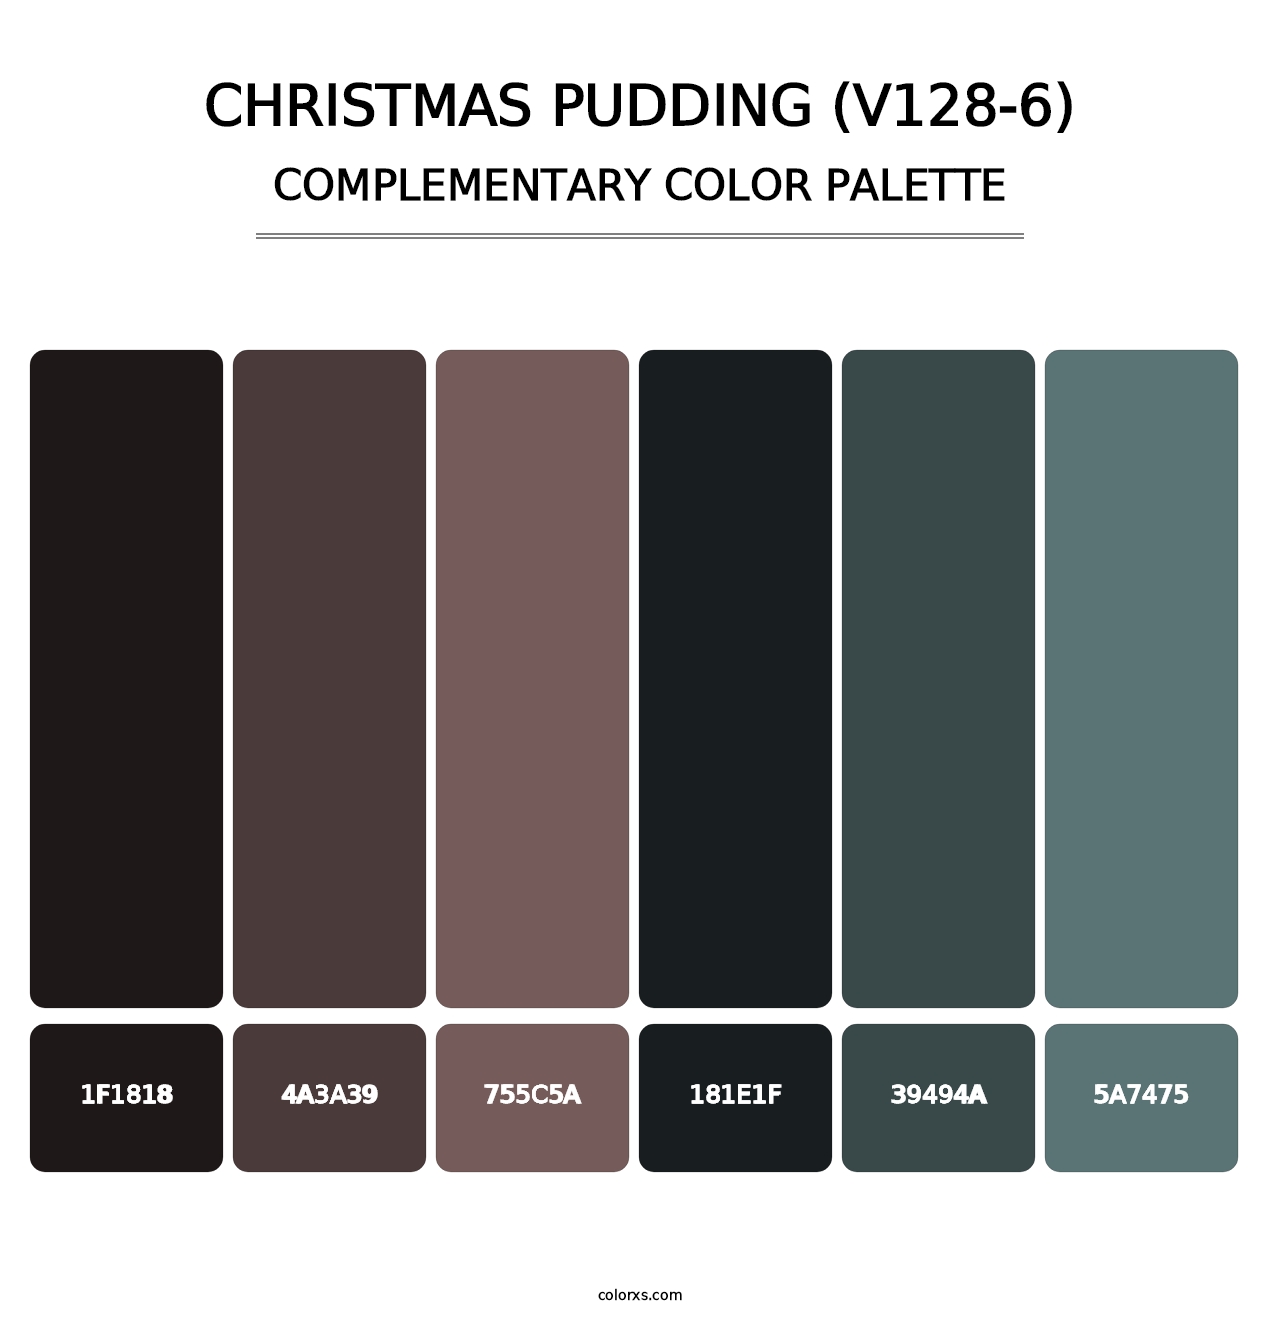 Christmas Pudding (V128-6) - Complementary Color Palette